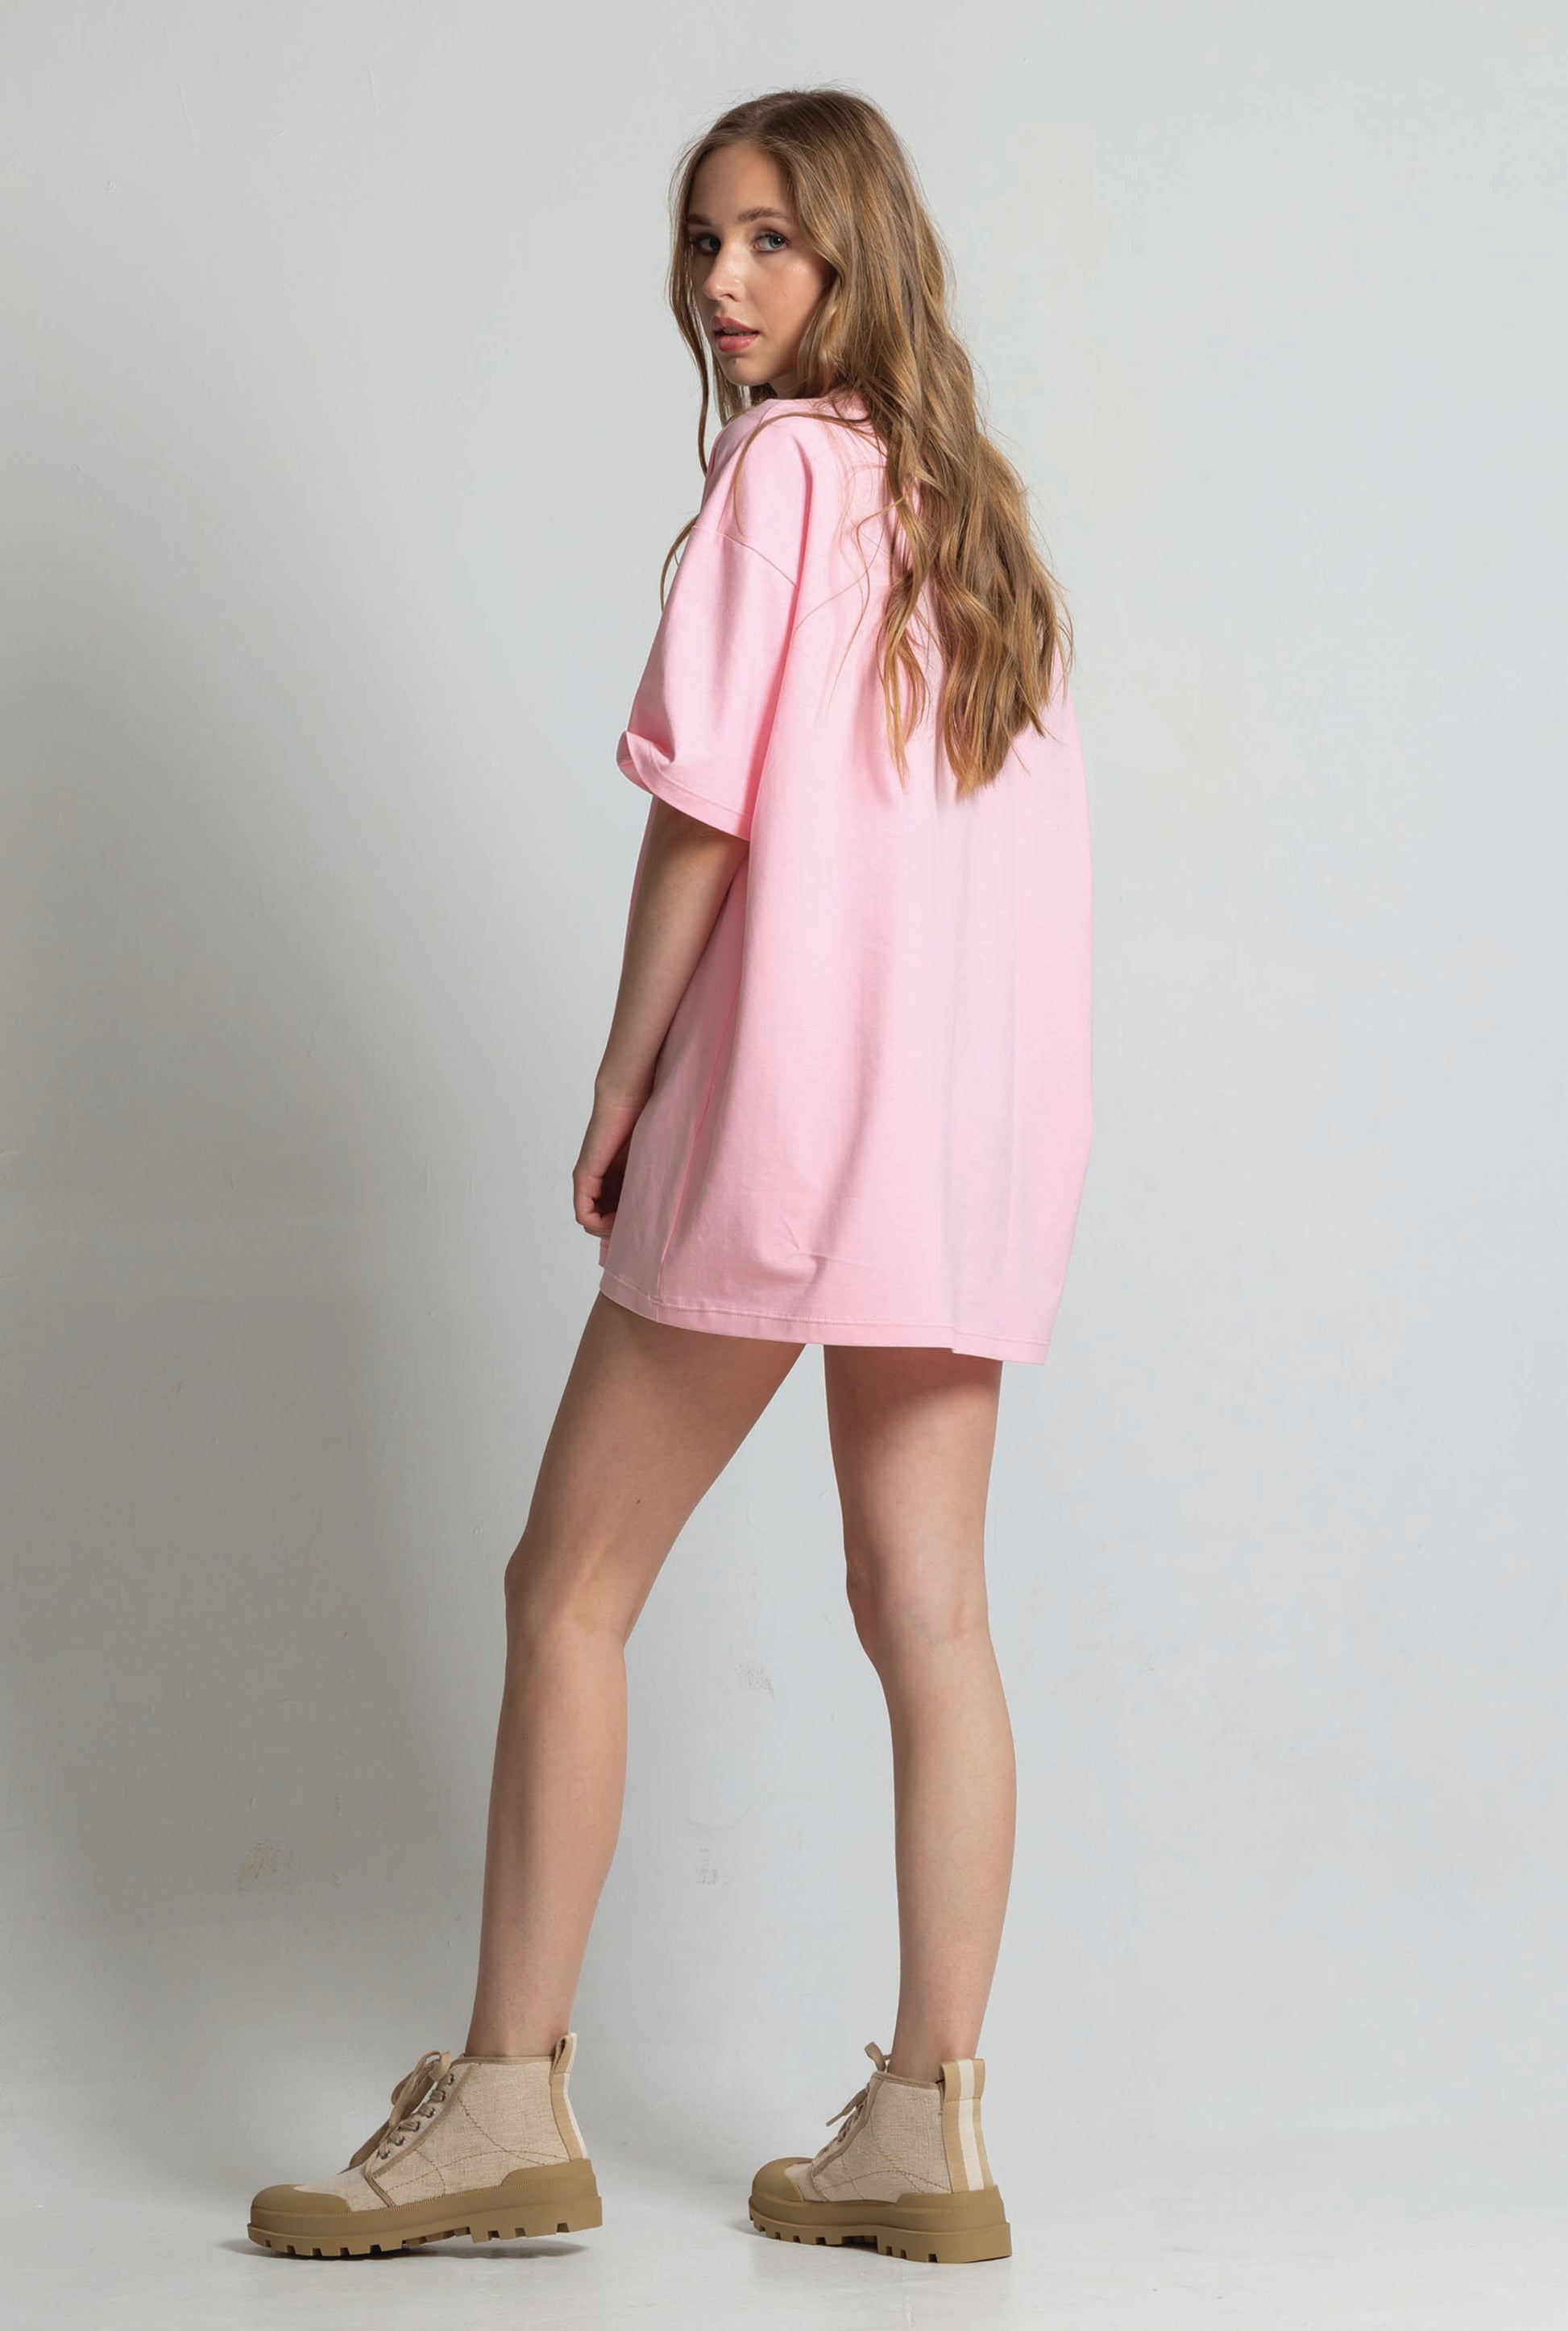 baby pink oversized tshirt for women